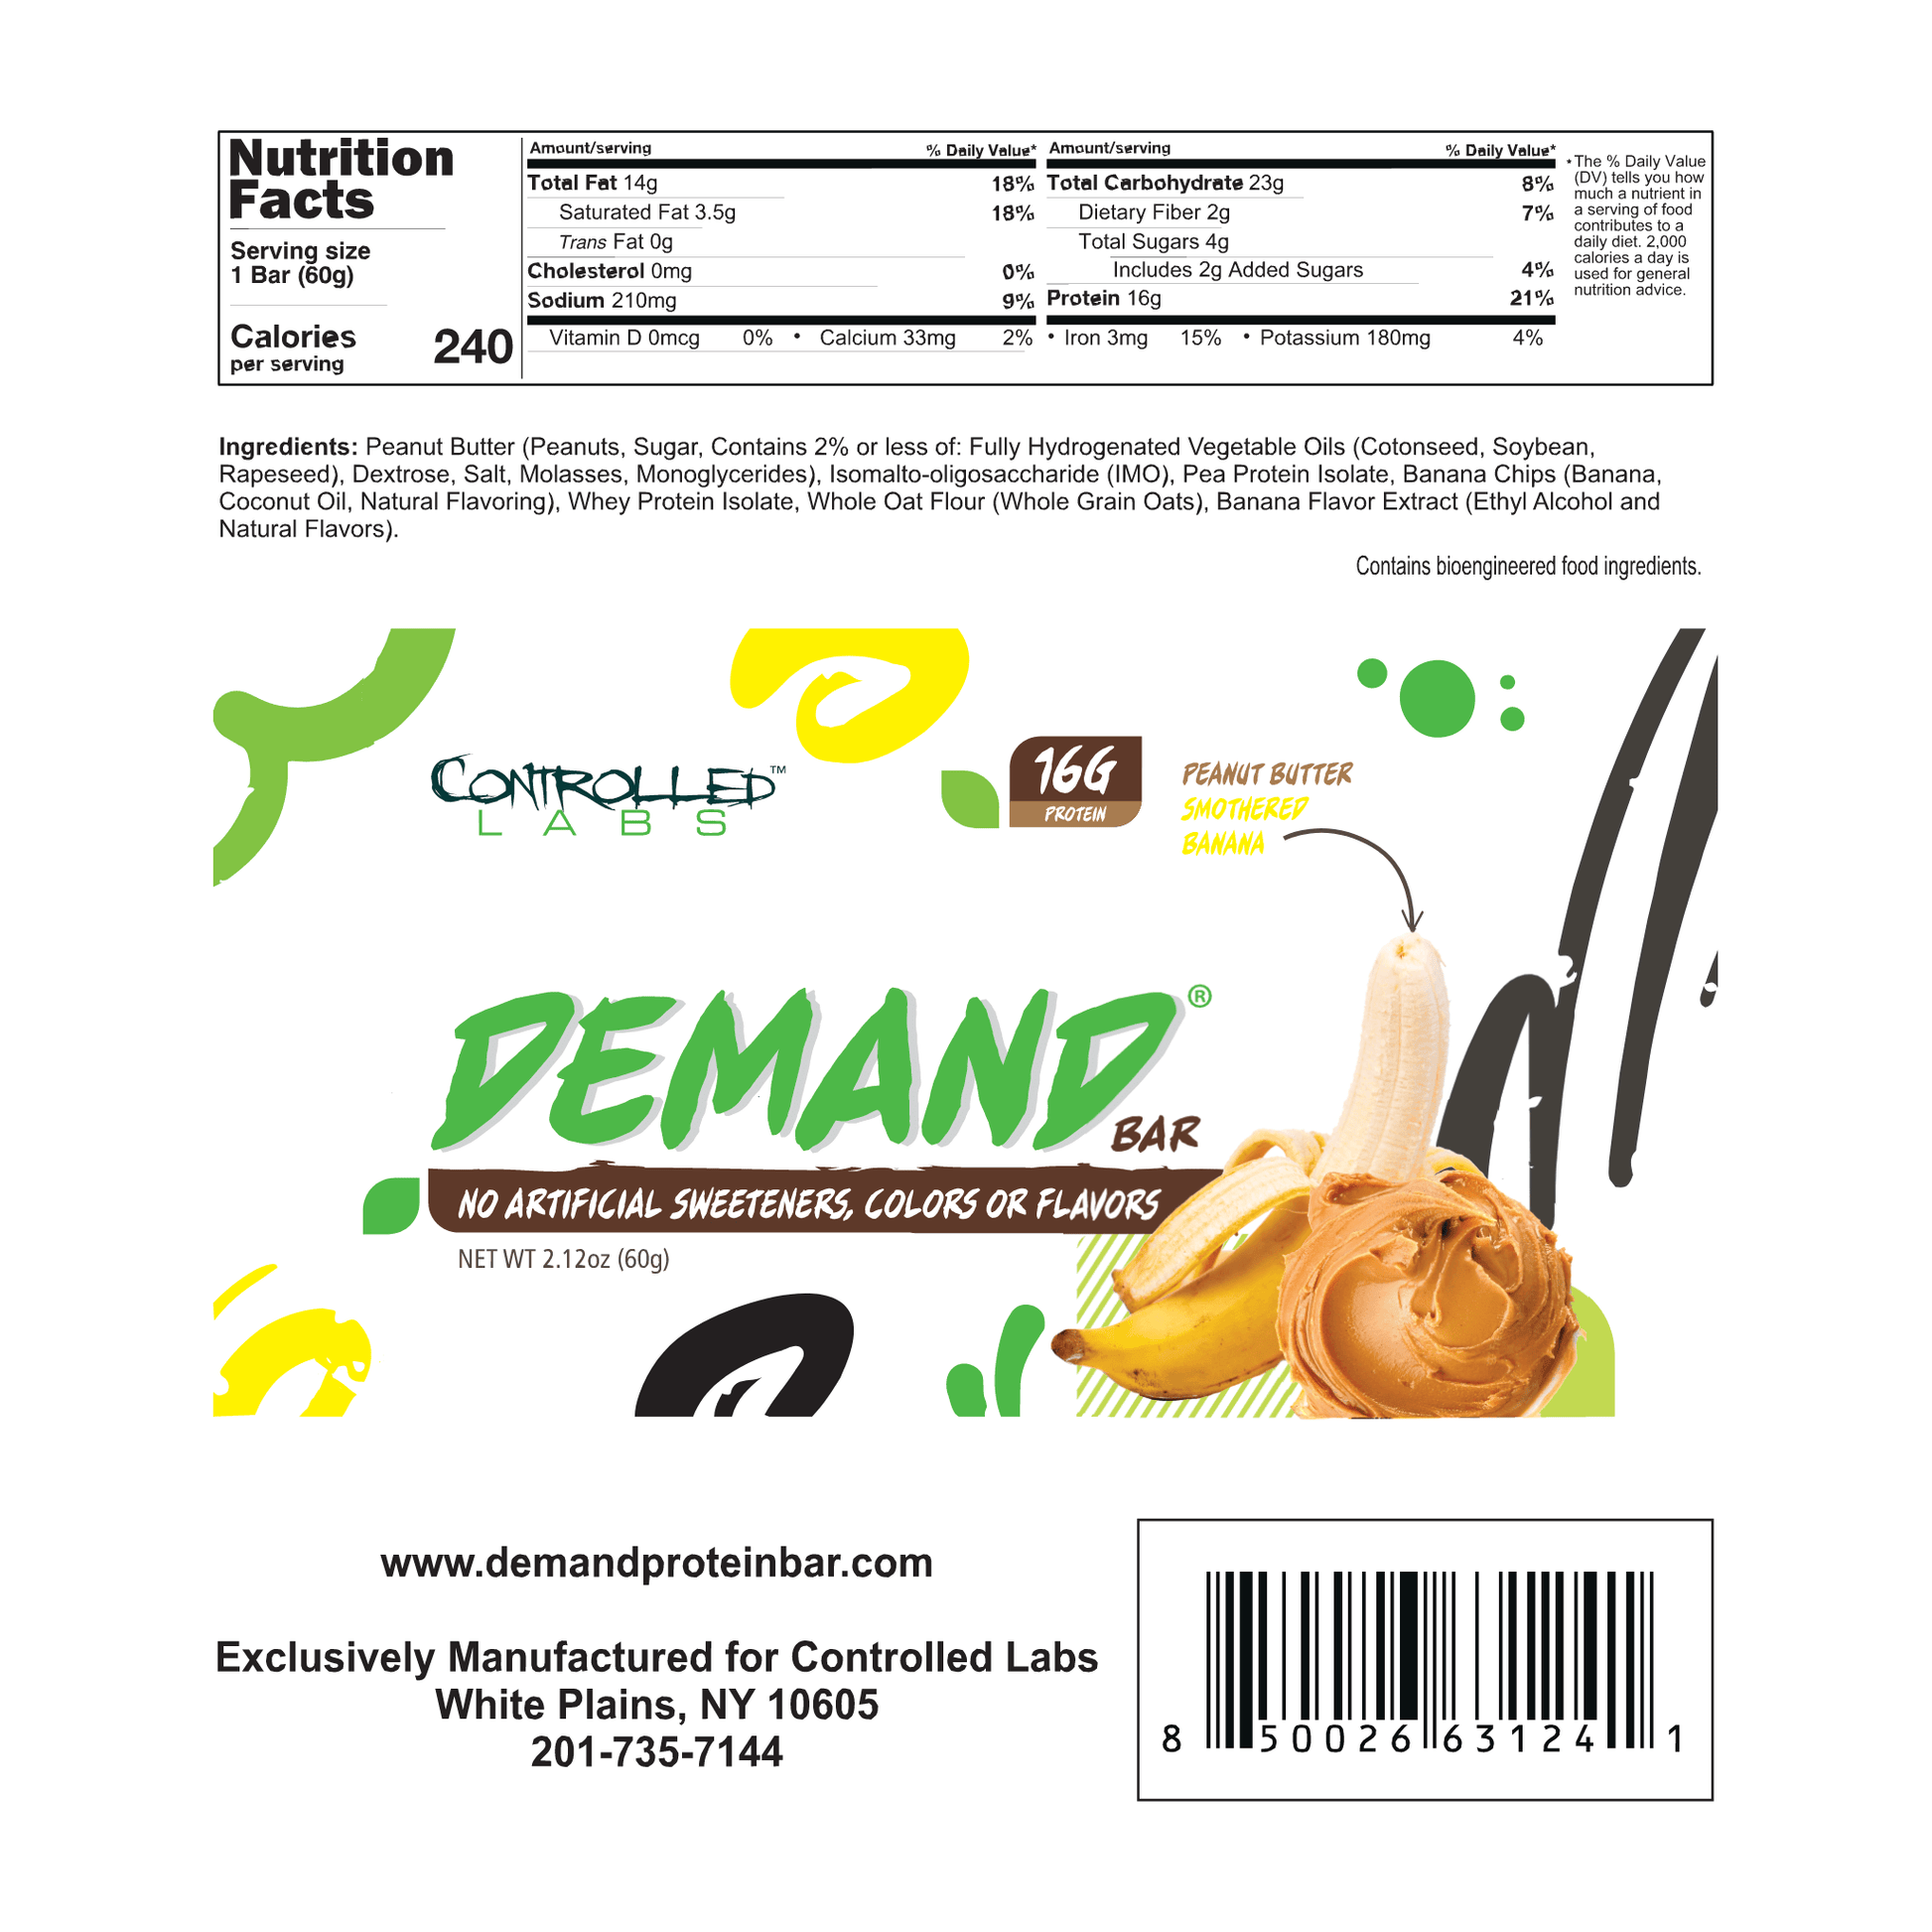 Controlled Labs Demand Protein Bar Peanut Butter Smothered Banana Nutrition Facts